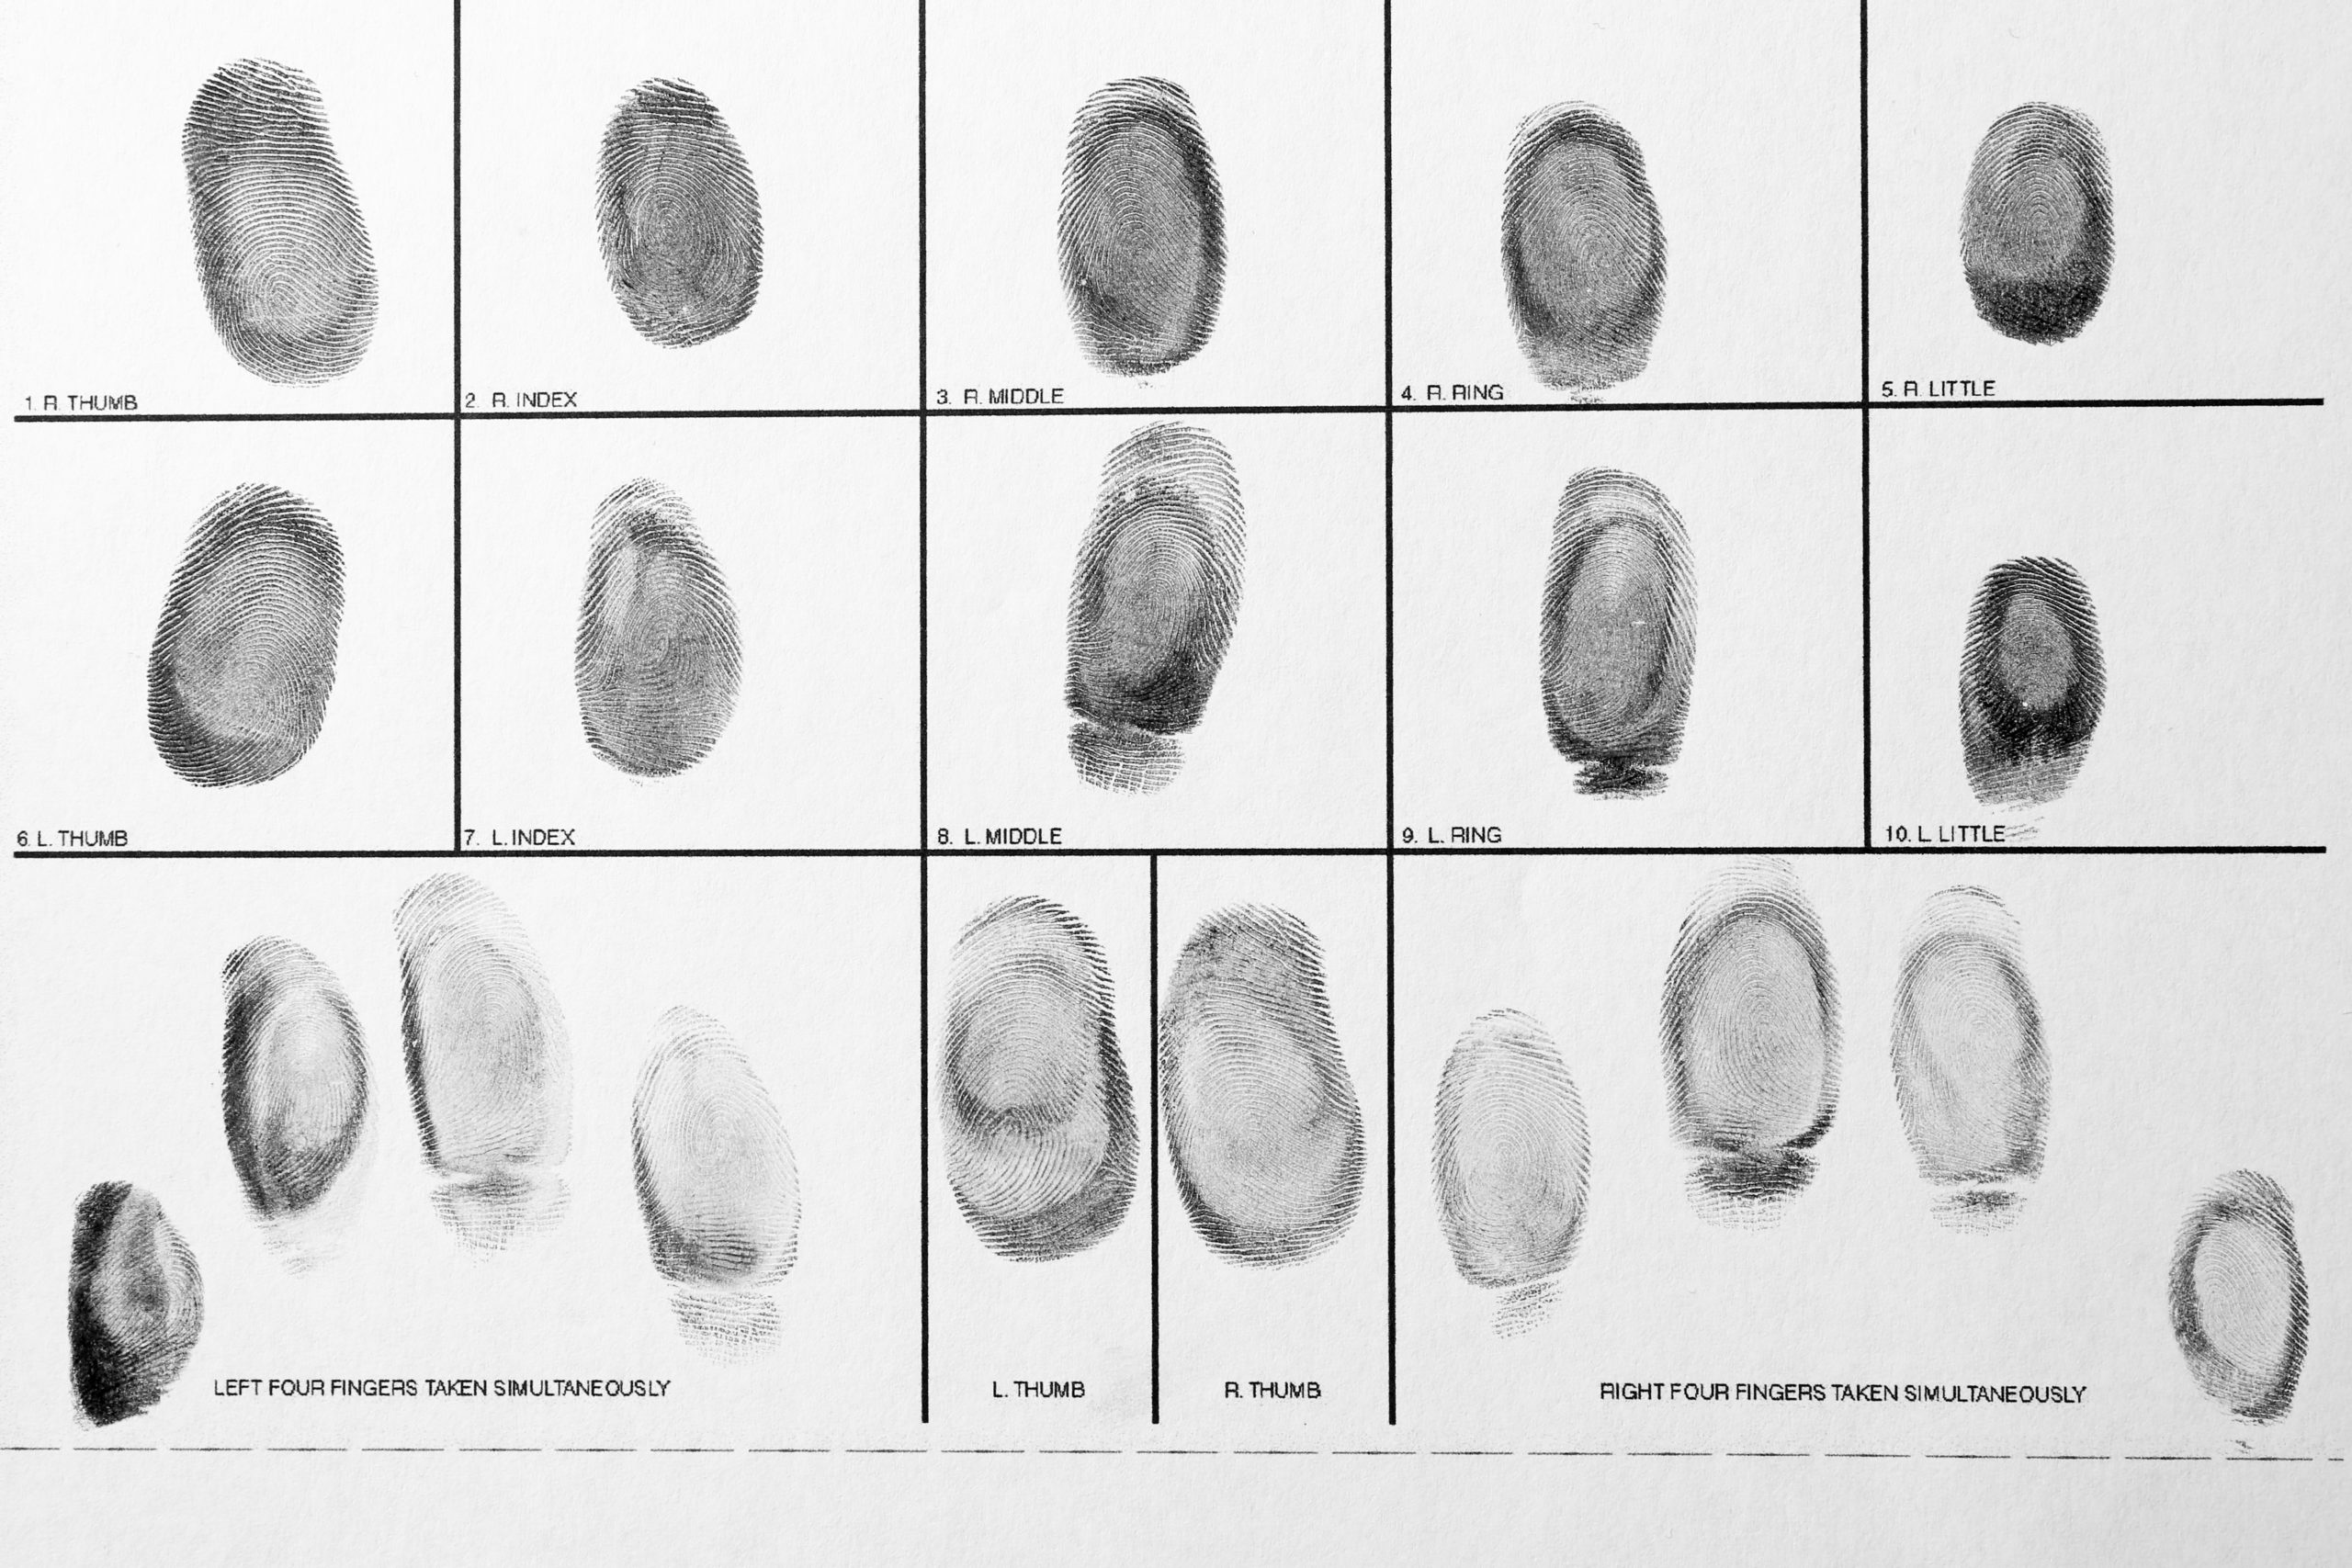 Police form with fingerprints, top view. Forensic examination